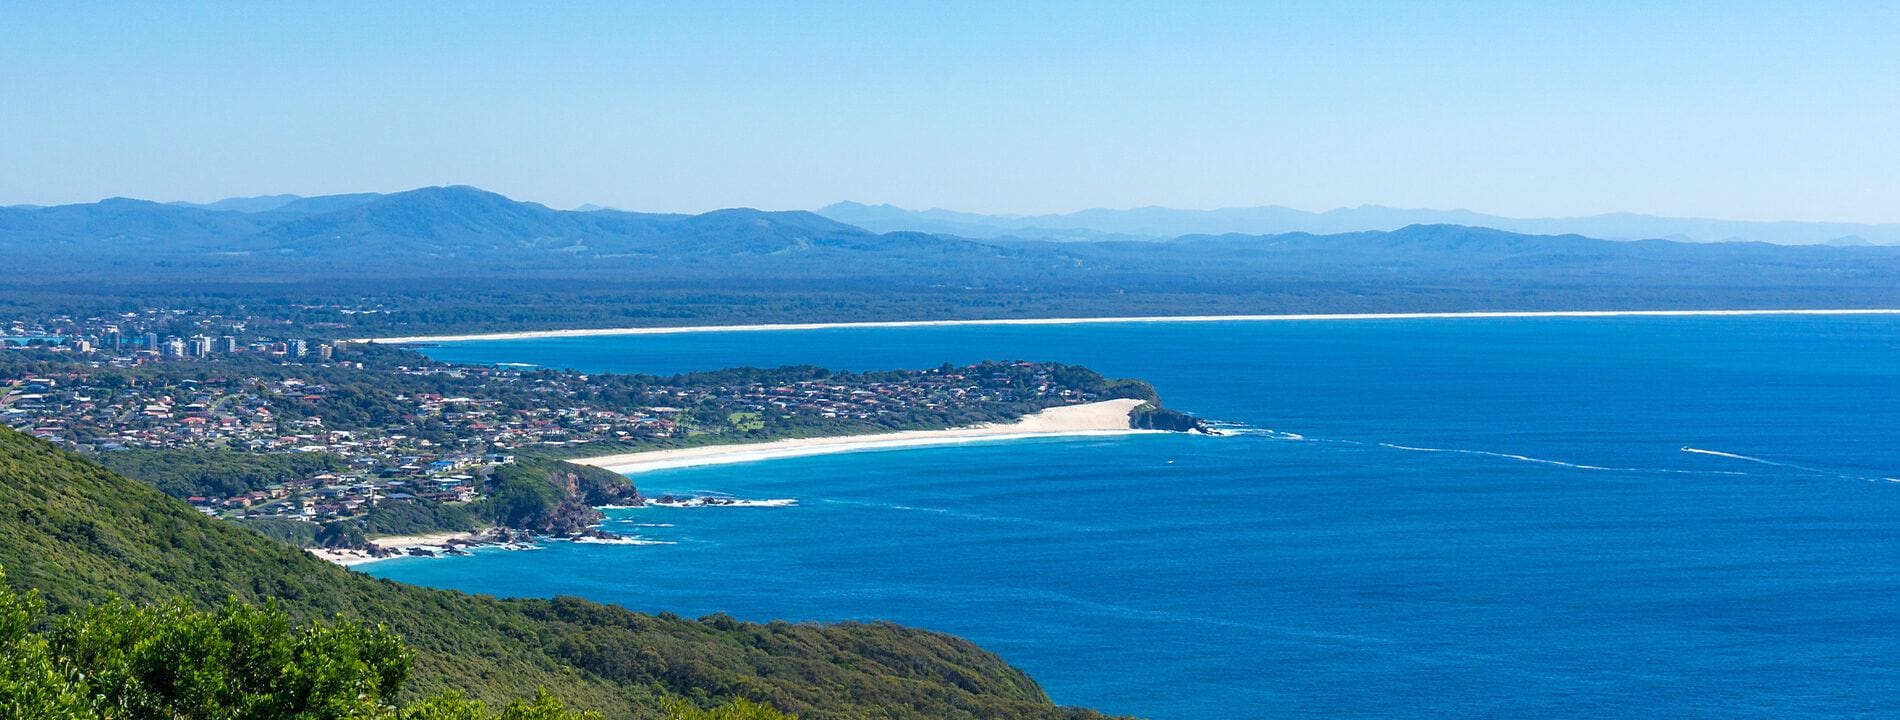 10 reasons to visit Port Stephens this spring